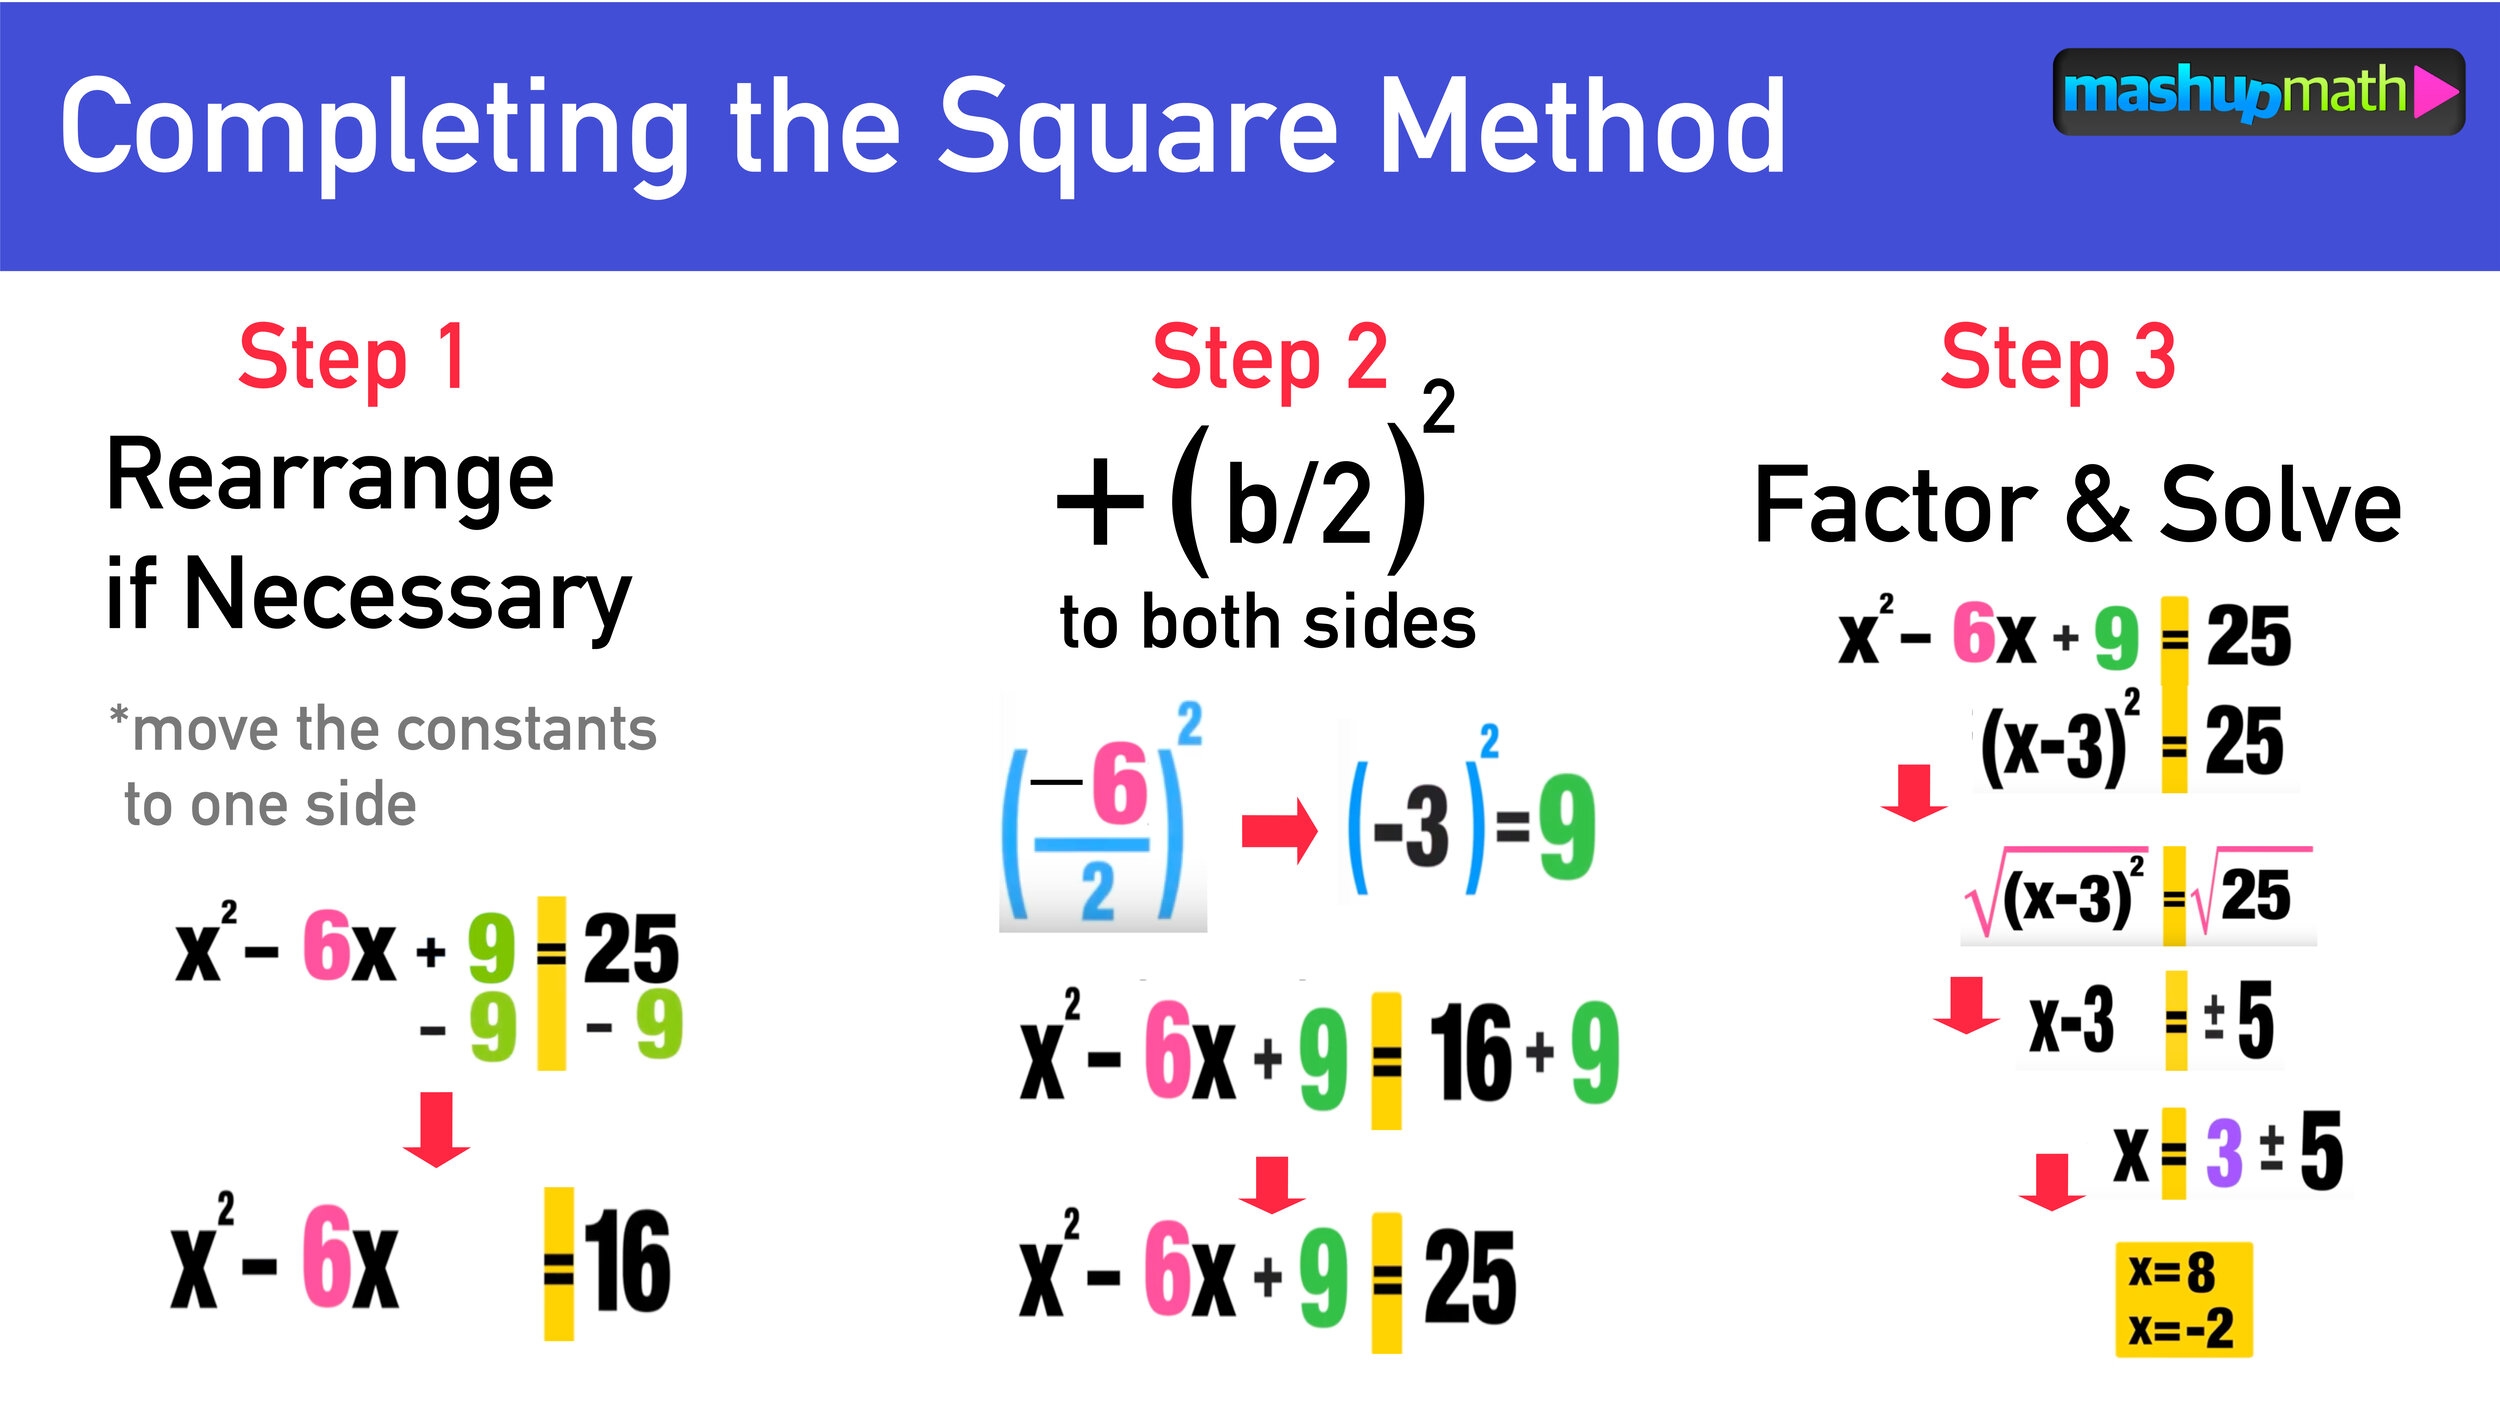 completing-the-square-formula-your-step-by-step-guide-mashup-math-math-worksheet-answers